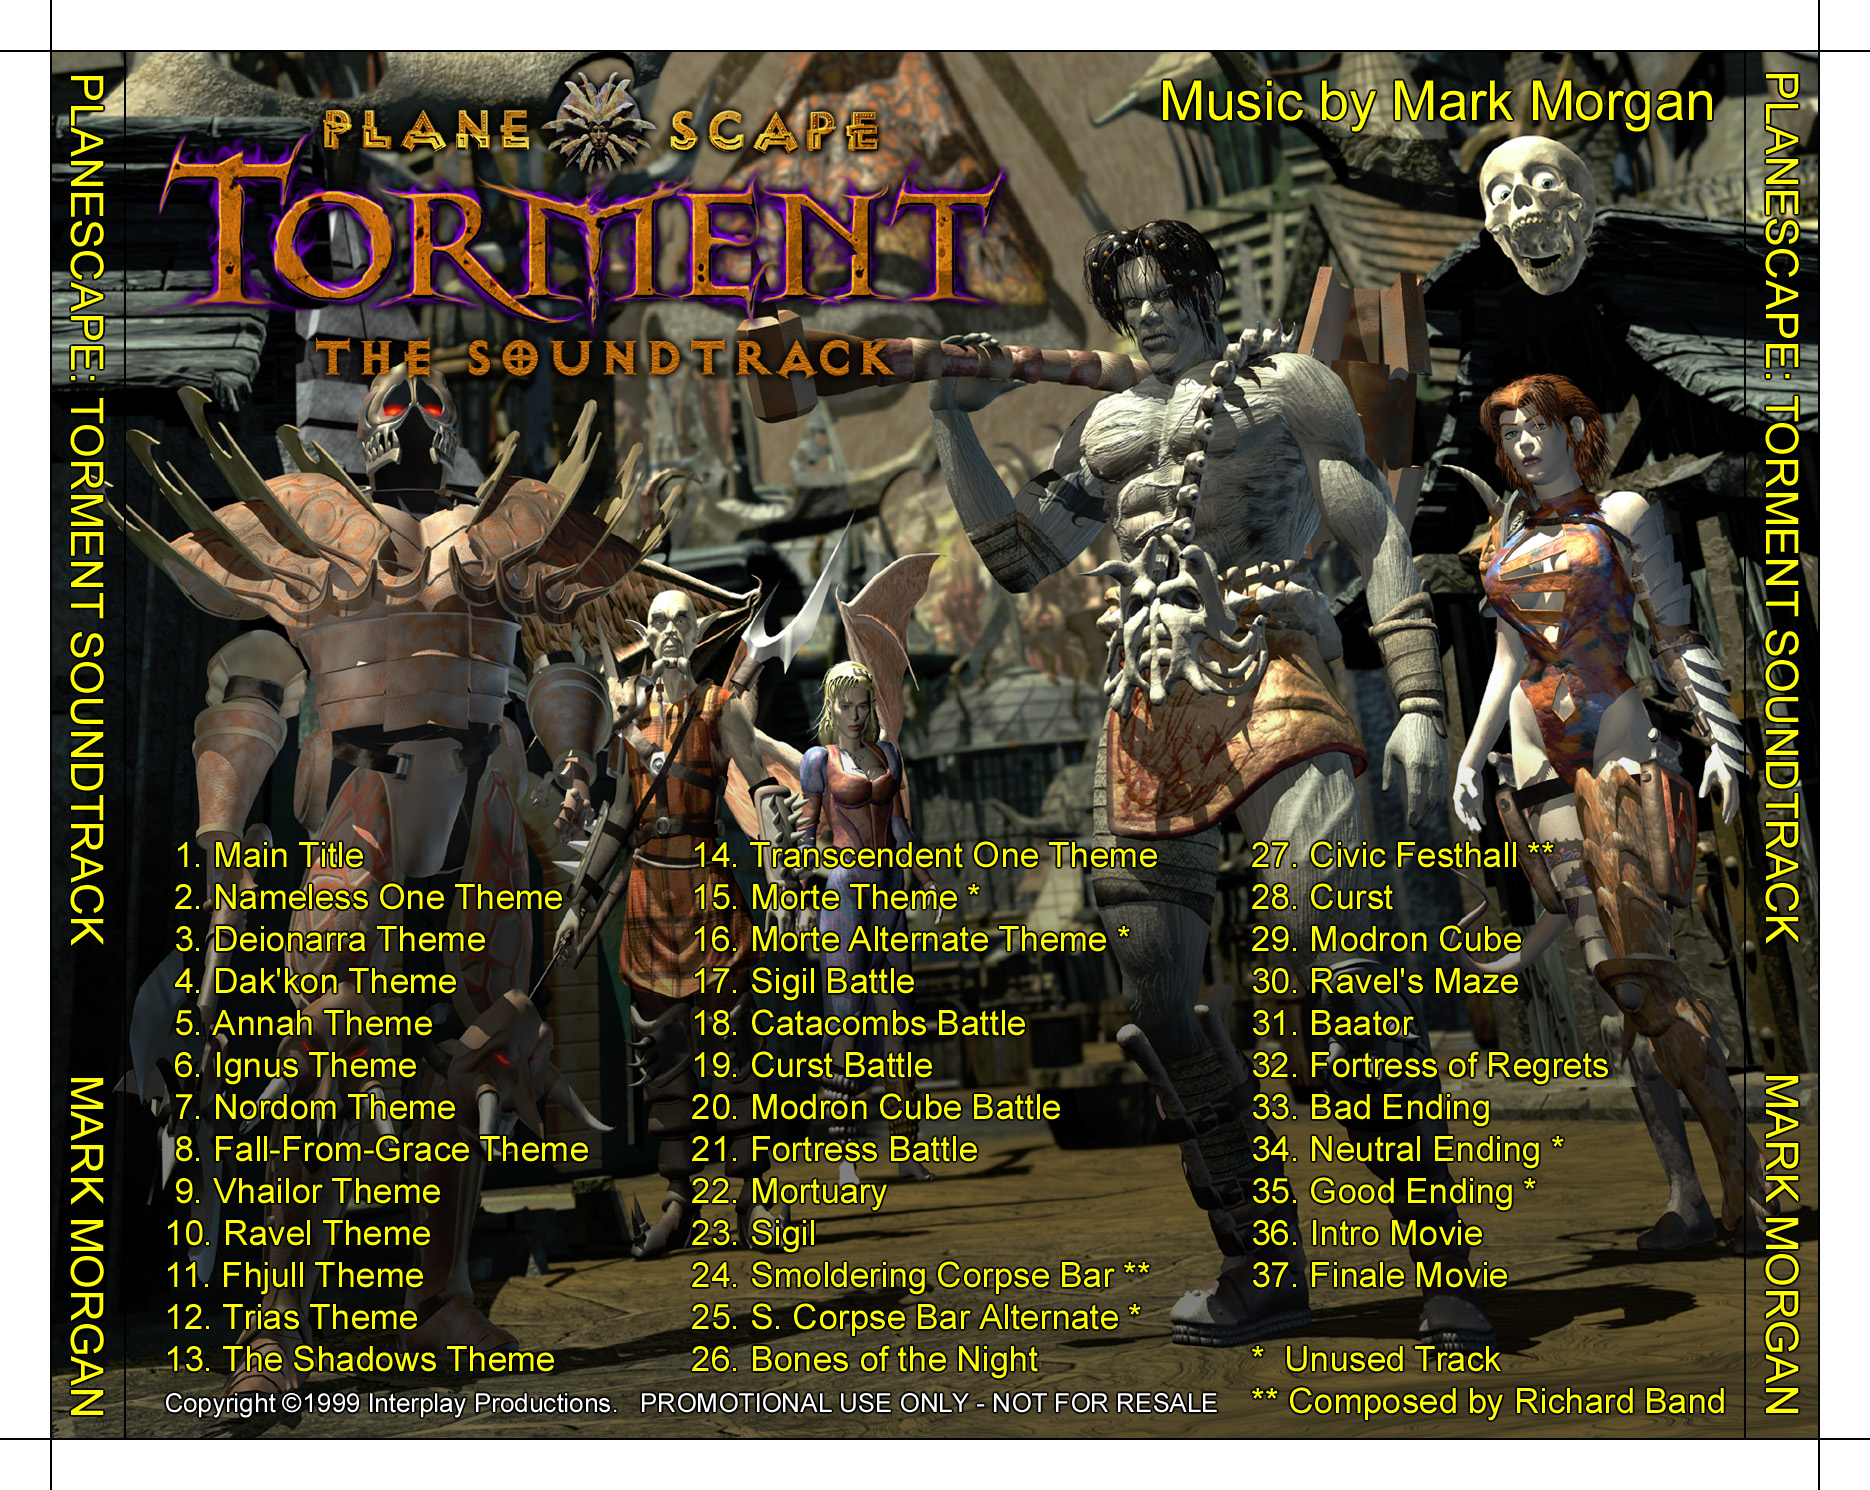 Cd Back Cover - Planescape Torment Characters , HD Wallpaper & Backgrounds